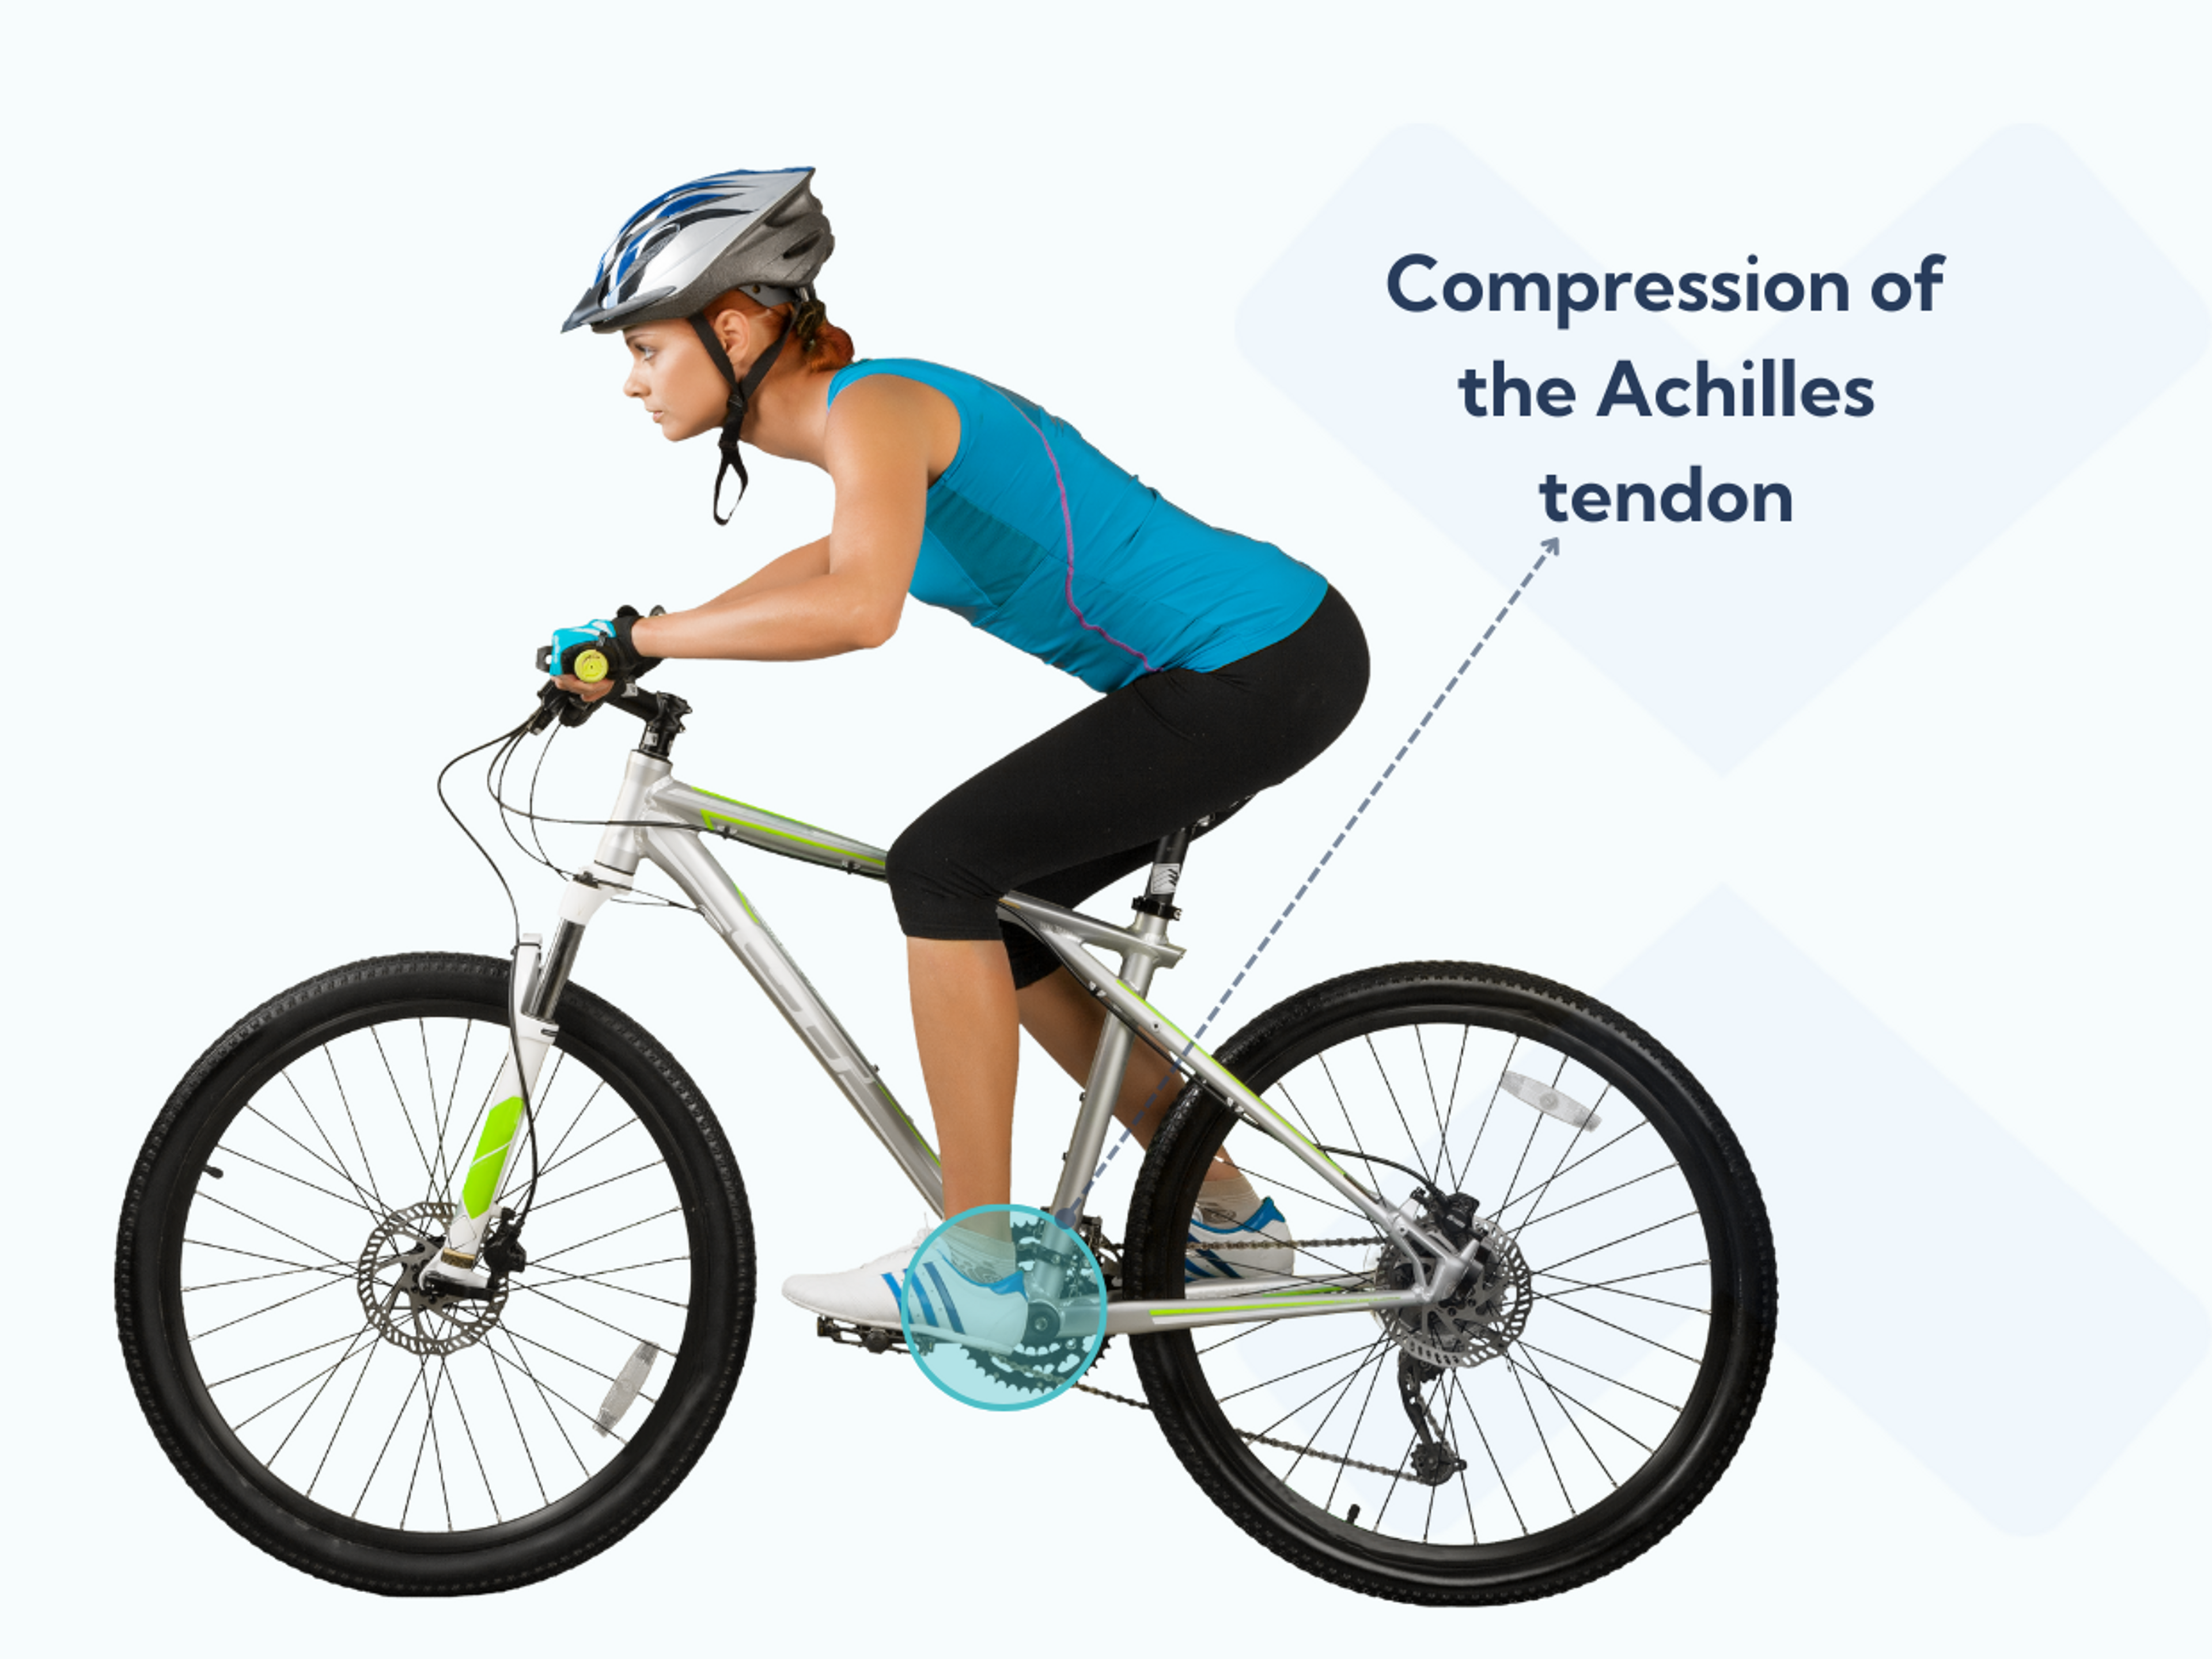 Some people with Achilles tendonitis find that cycling increases their pain.